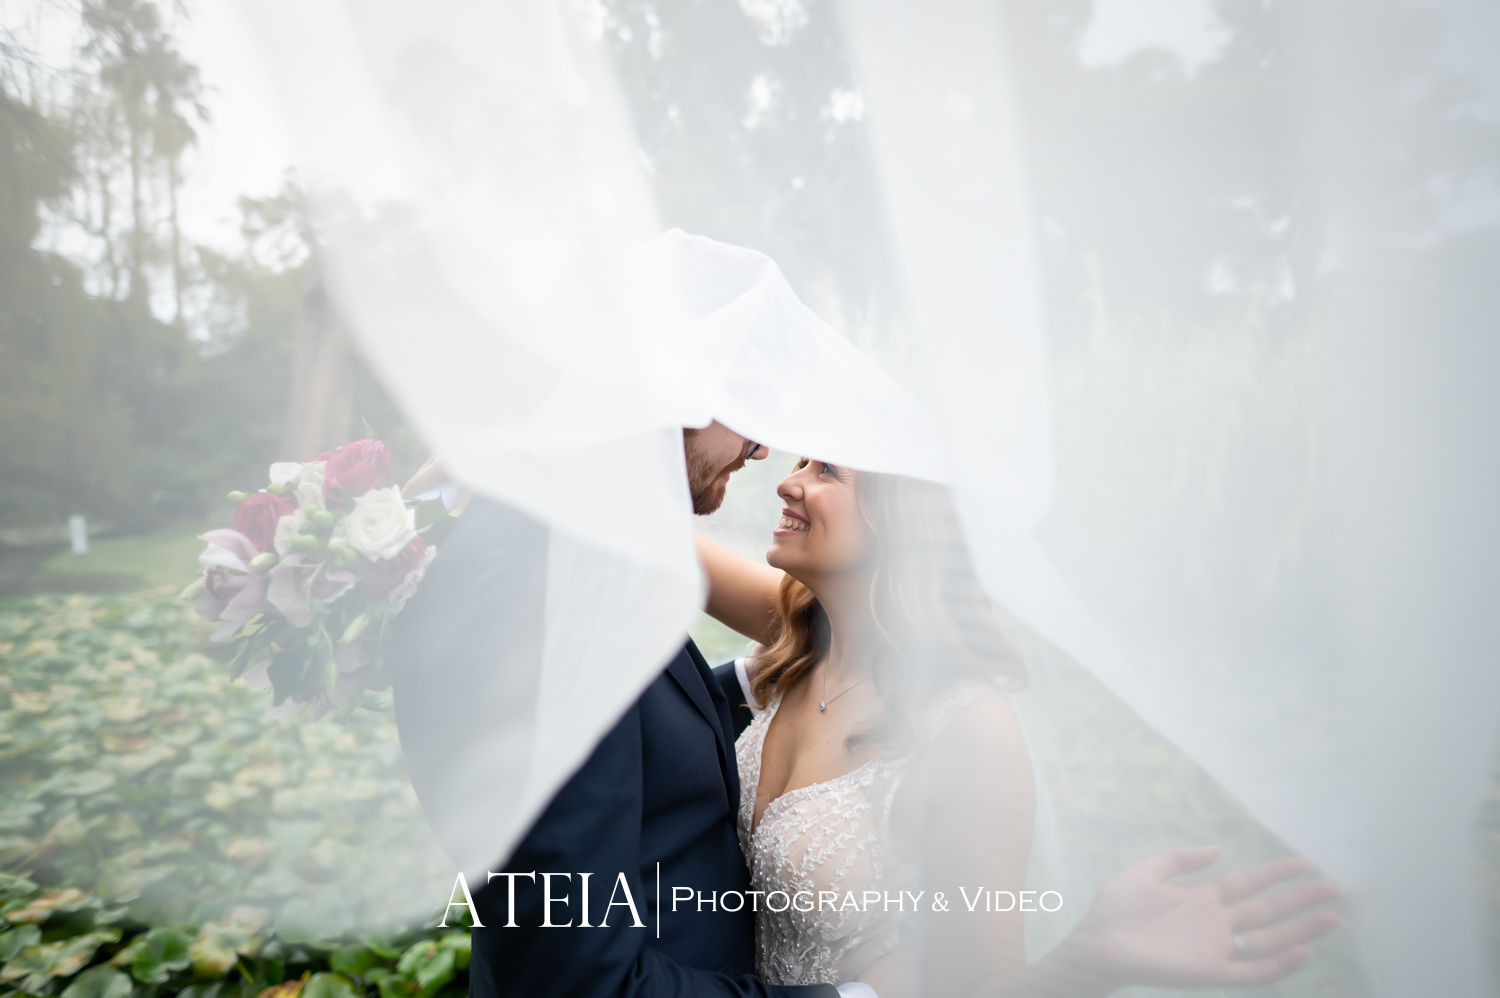 , Maggie and Sean&#8217;s wedding photography at Leonda by the Yarra captured by ATEIA Photography &#038; Video